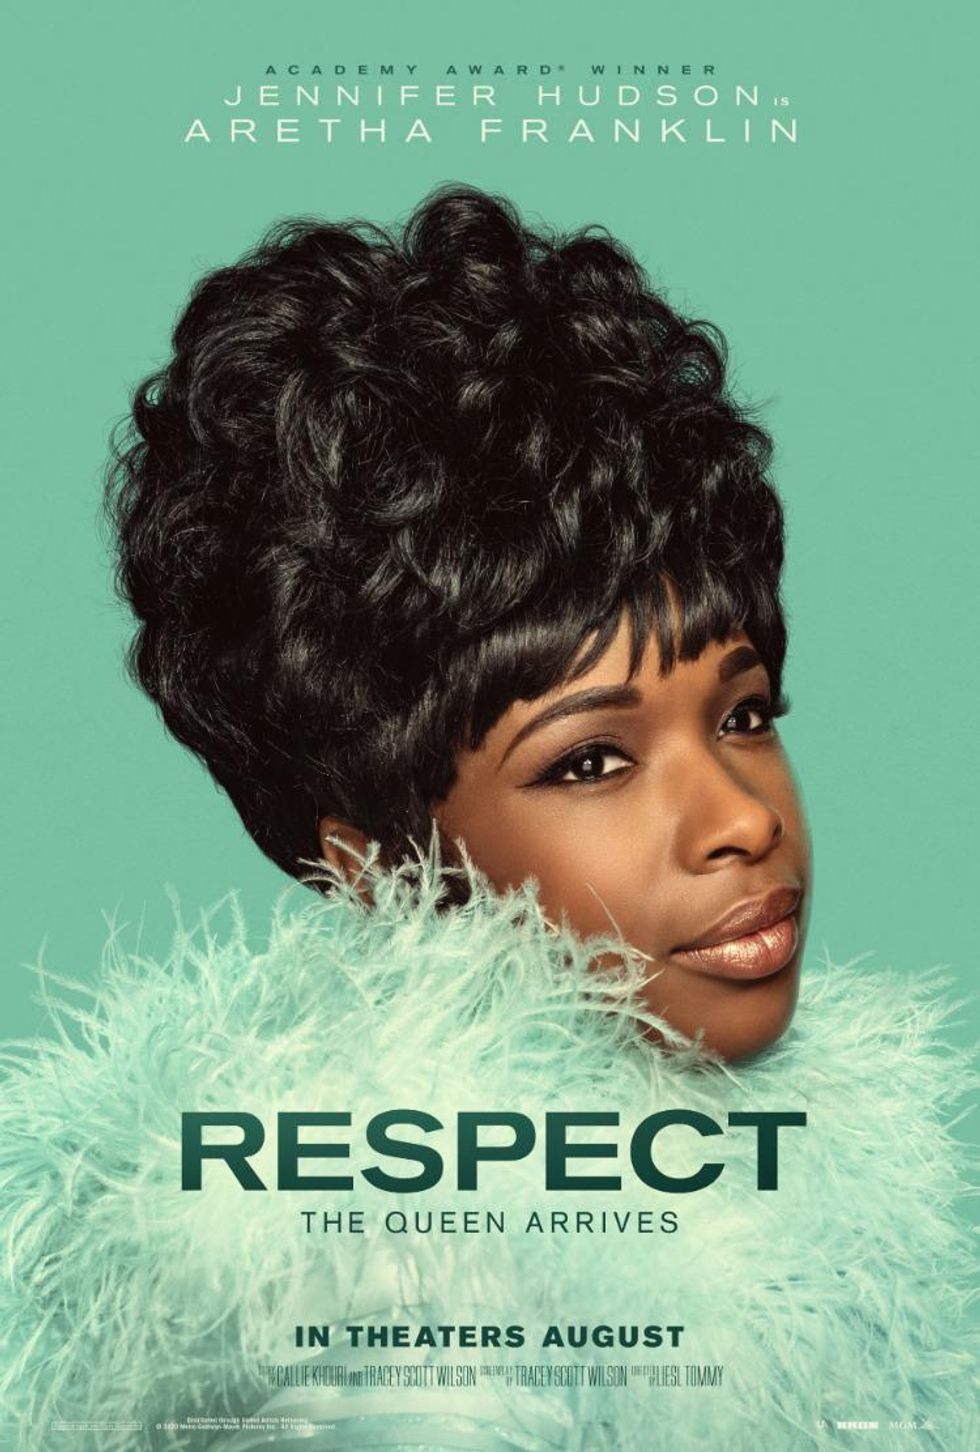 Aretha Franklin’s Biopic ‘Respect’ Opens With a Purposely Queer Moment